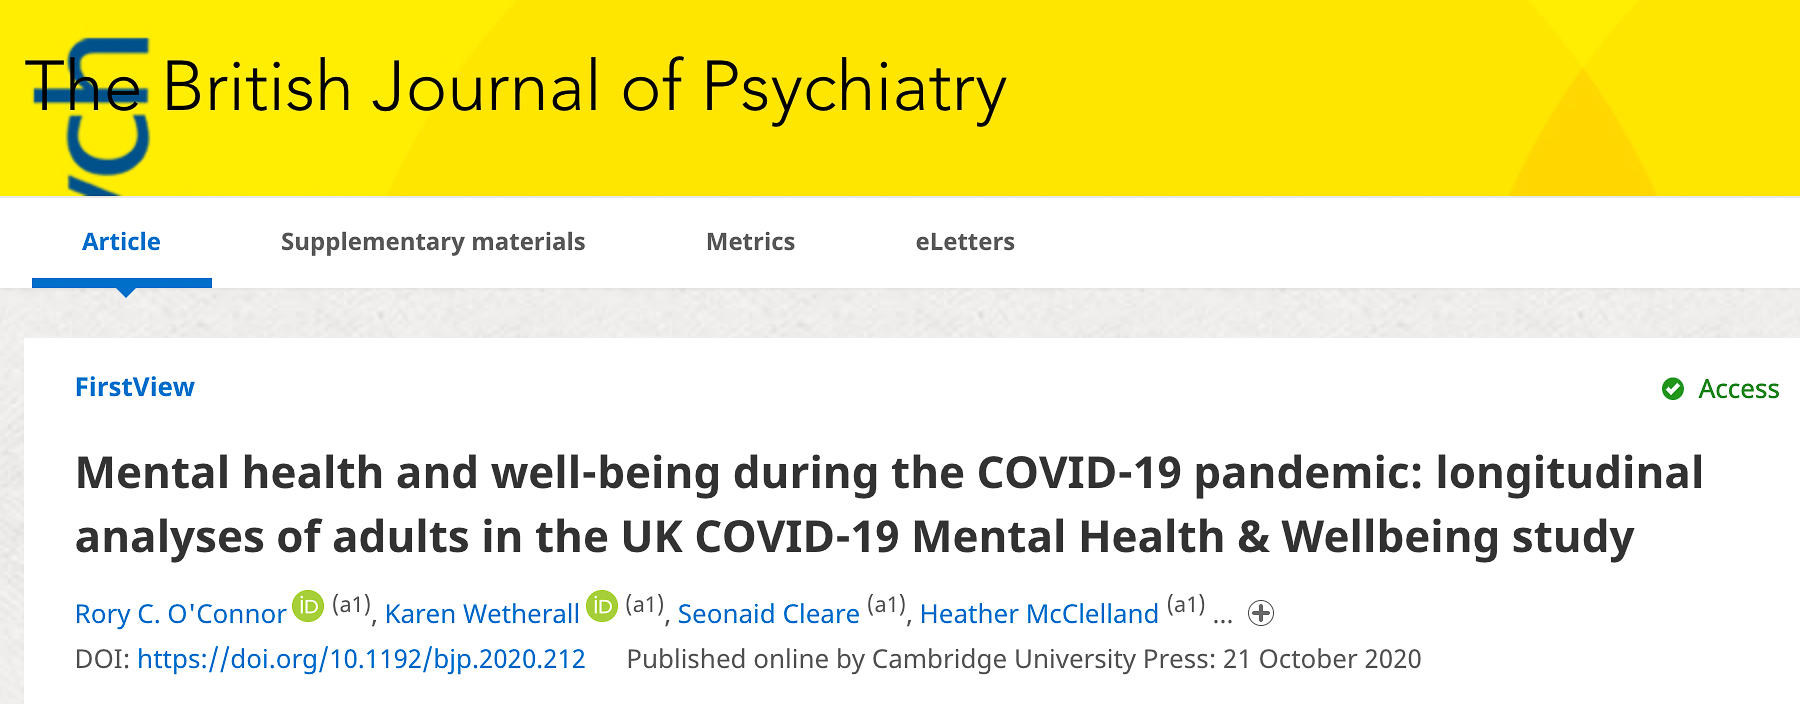 Mental-health-and-wellbeing-durving-the-COVID-19-pandemic